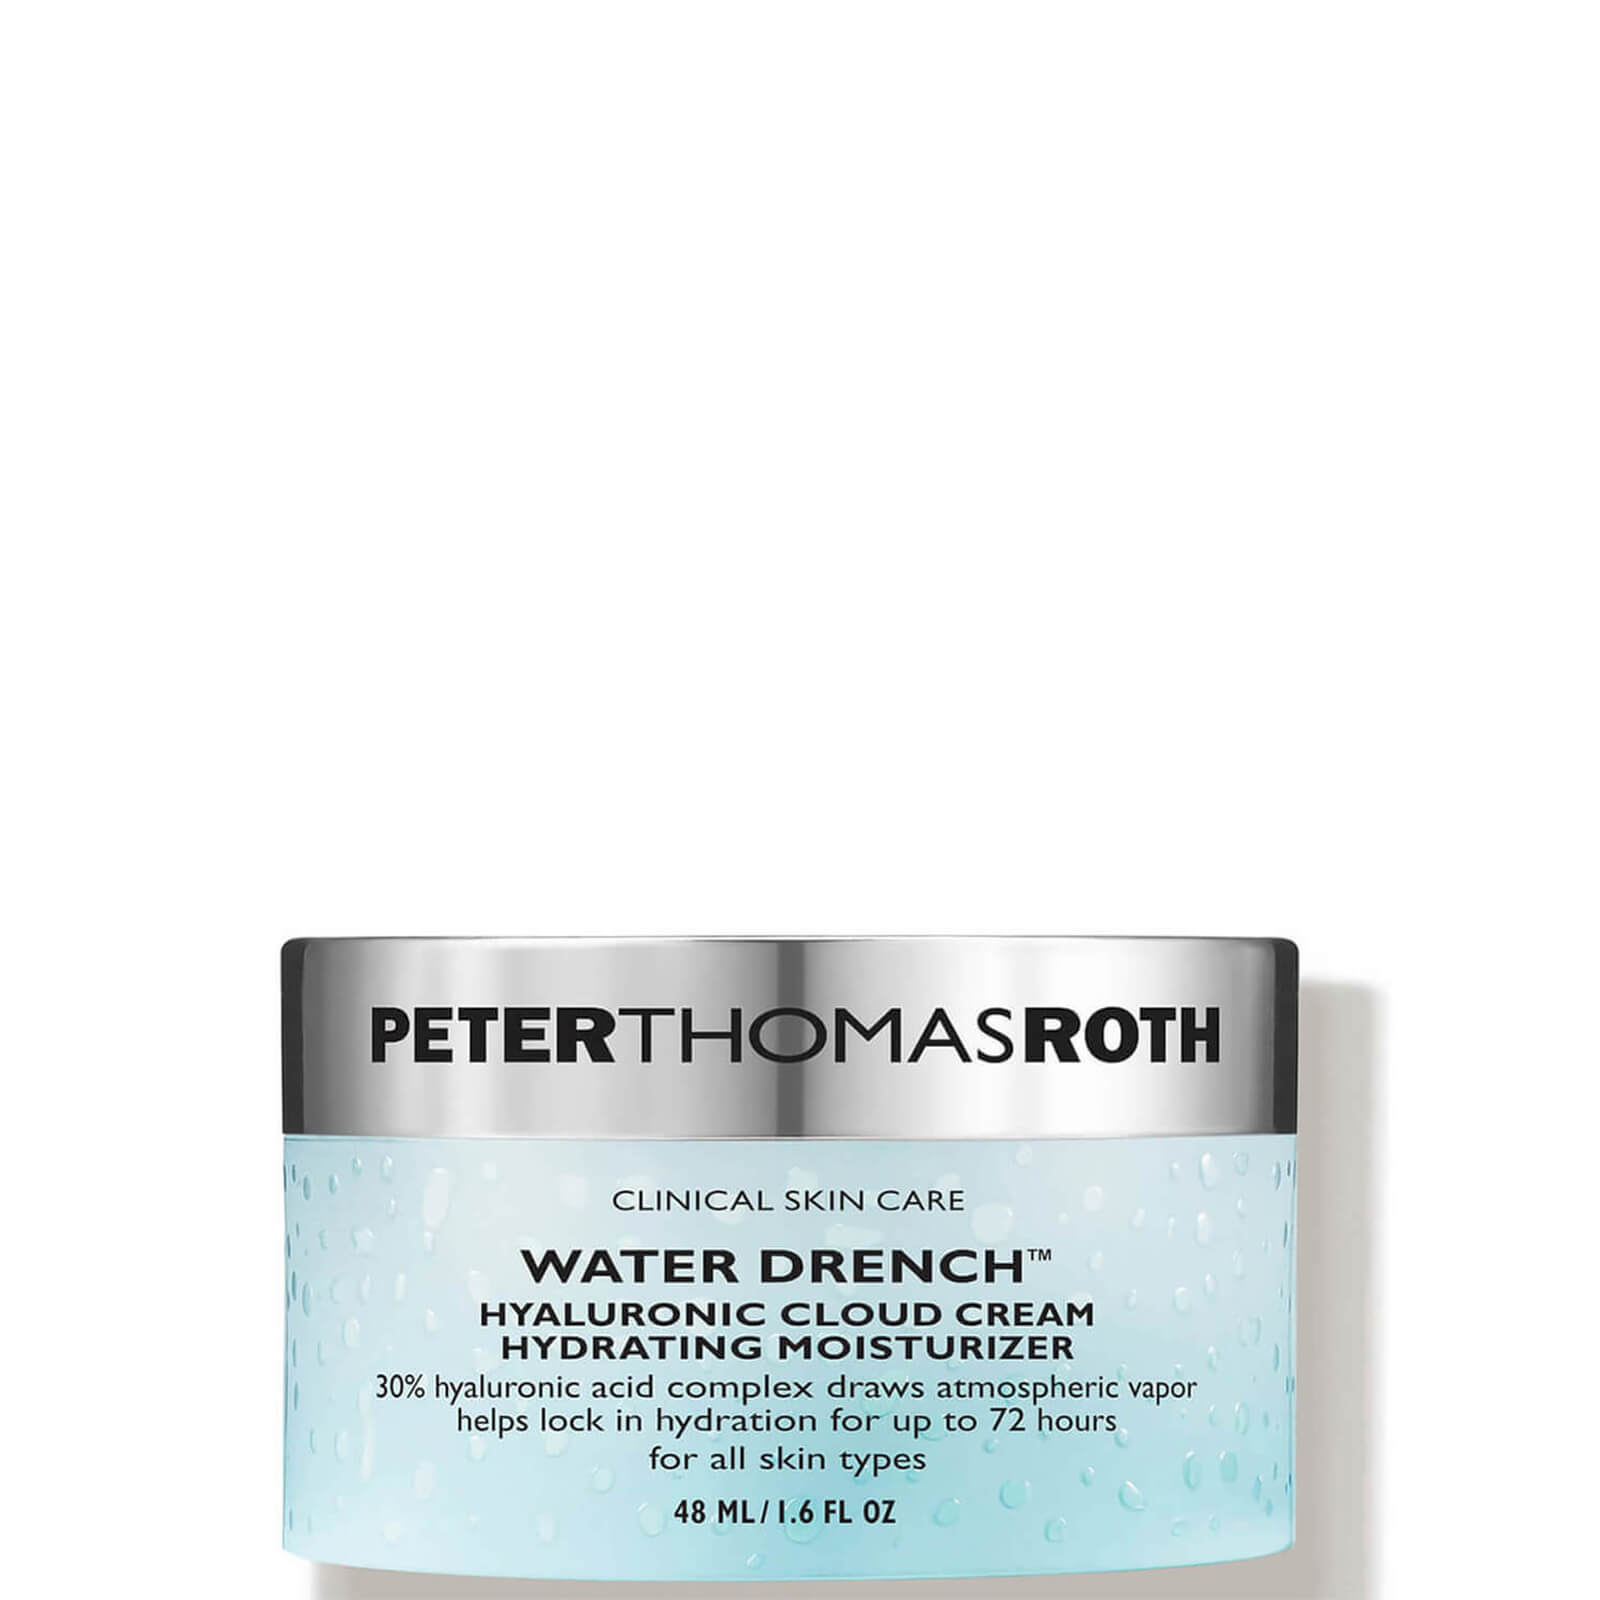 Photos - Cream / Lotion Peter Thomas Roth Water Drench Hyaluronic Cloud Cream 50ml